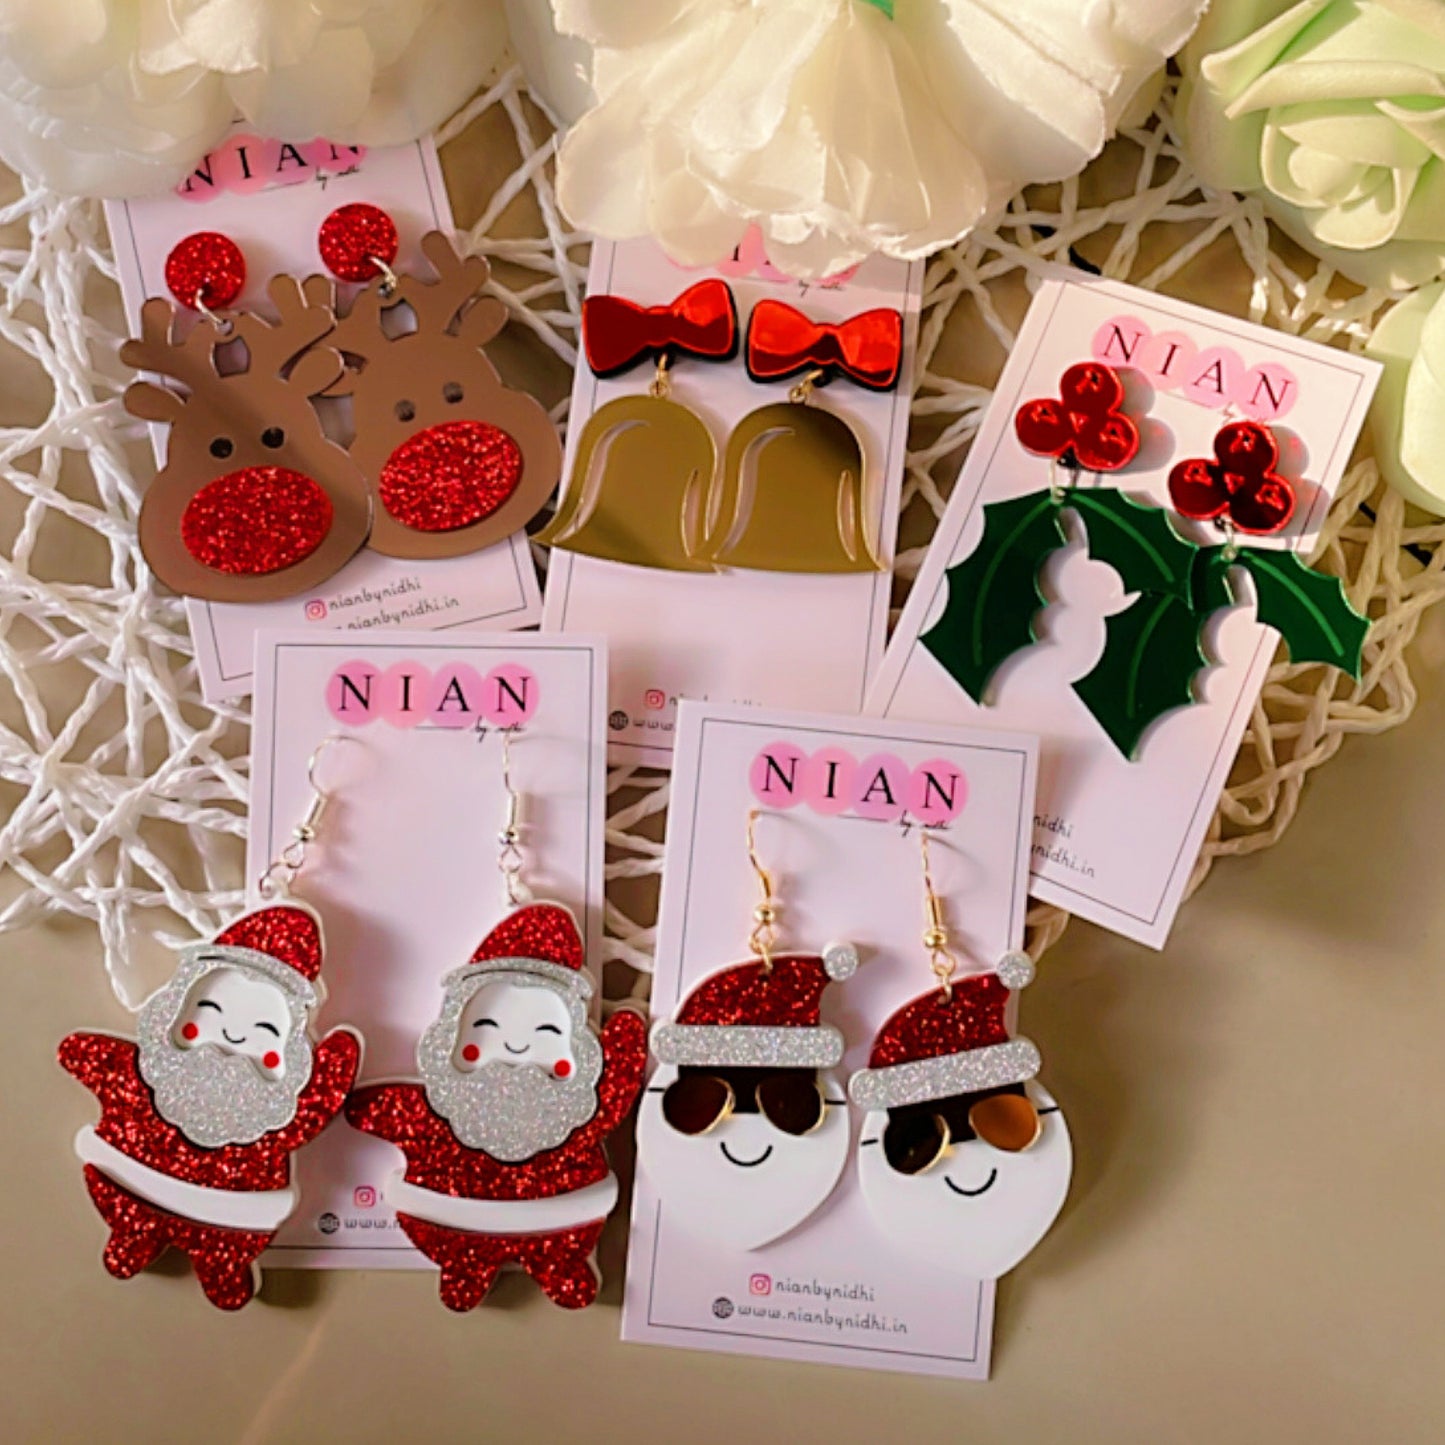 Christmas Carnival Curation (Set of 5) - Nian by Nidhi - consists 5 earrings with a Christmas theme - placed in a light flowery background